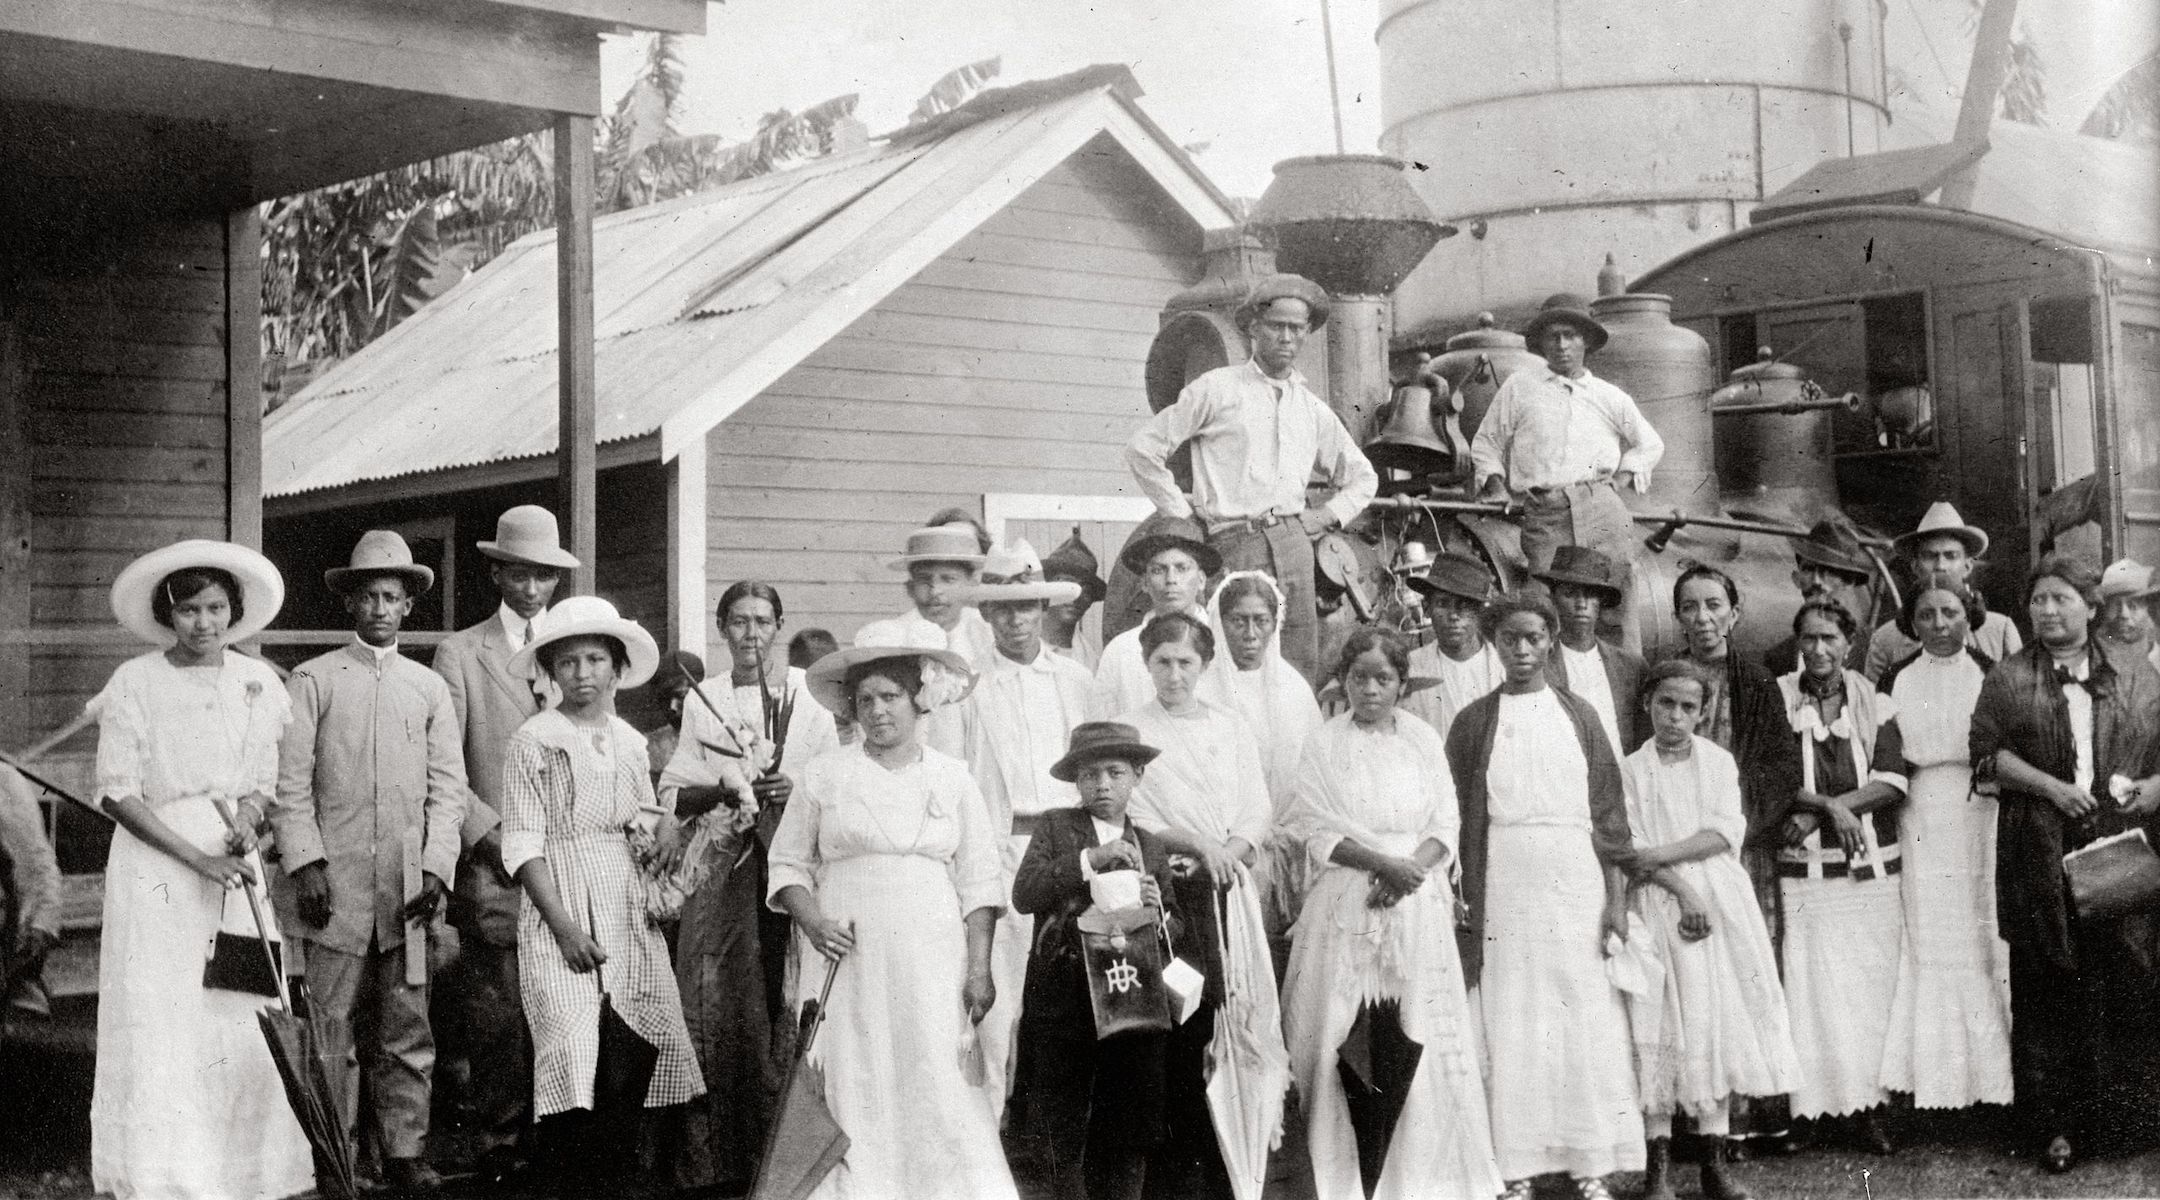 A view outside a train station in Honduras in 1915